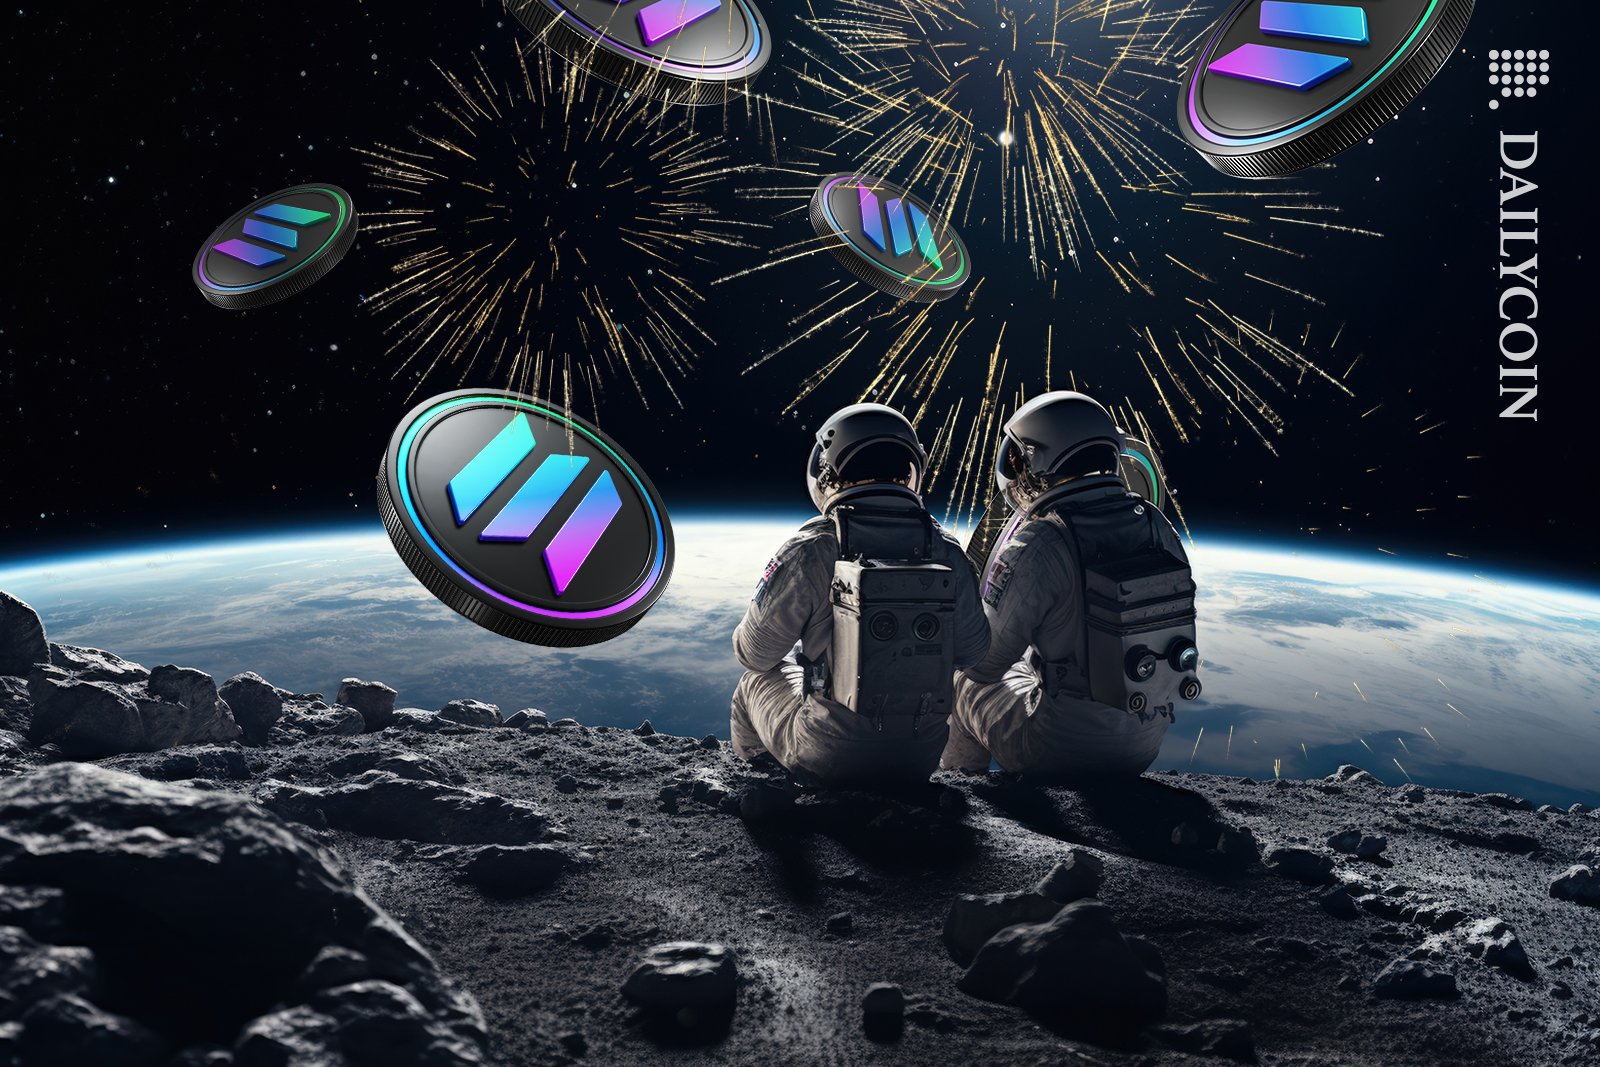 Two astronauts sitting on the moon watching solana coins burst with fireworks from earth.